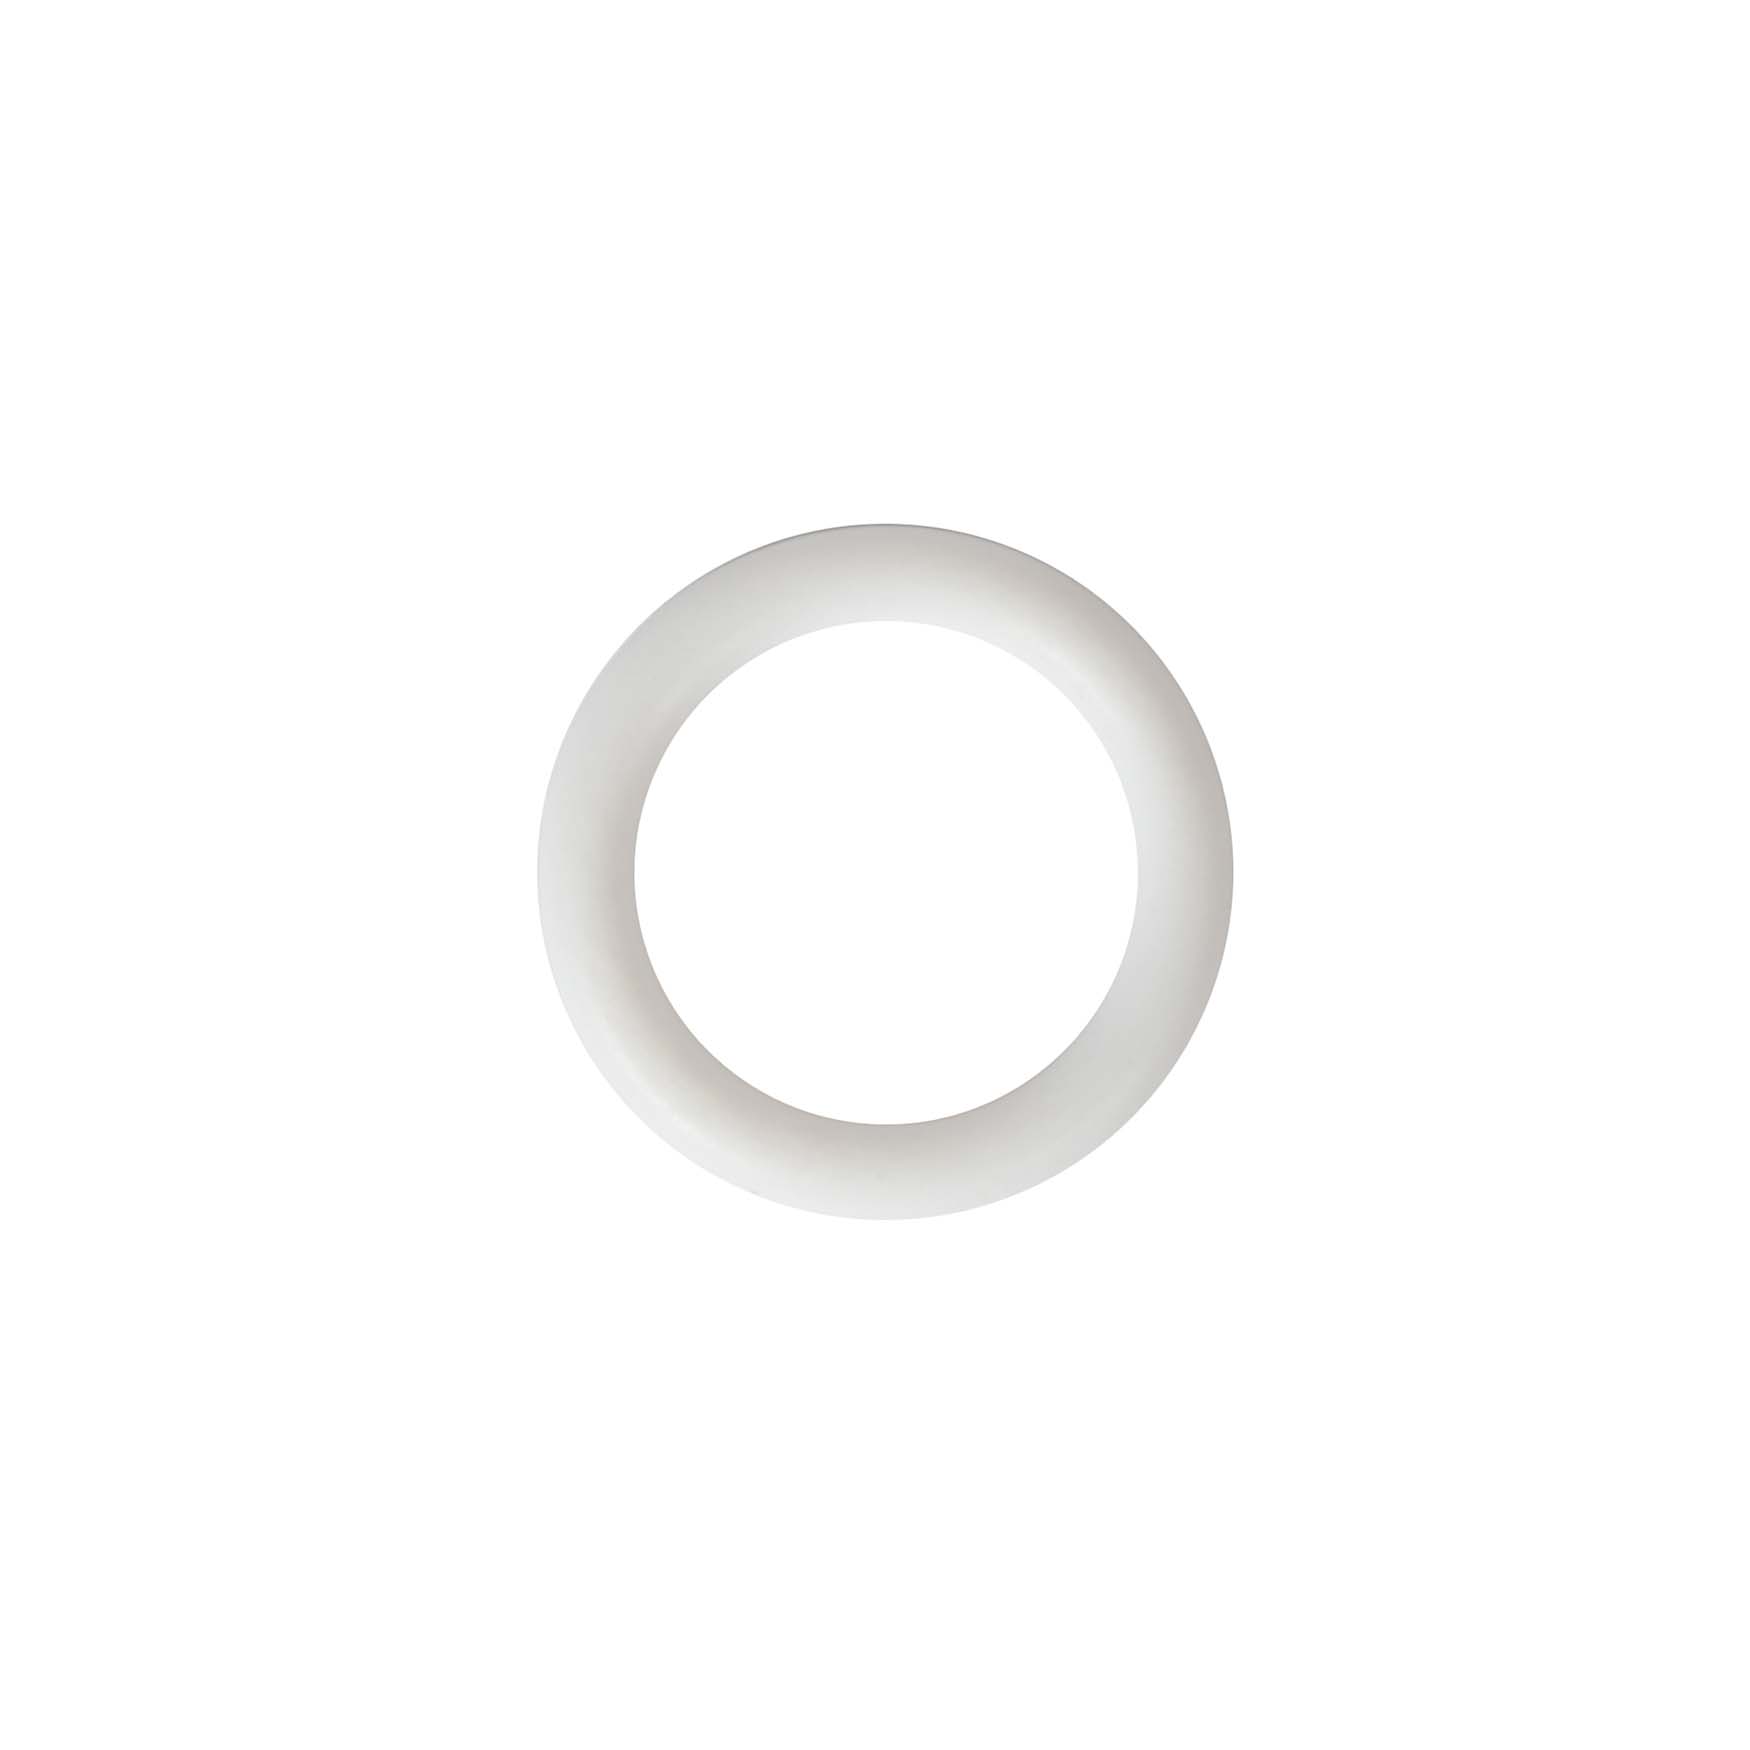 White PTFE O-Rings Price Starting From Rs 300/Unit | Find Verified Sellers  at Justdial